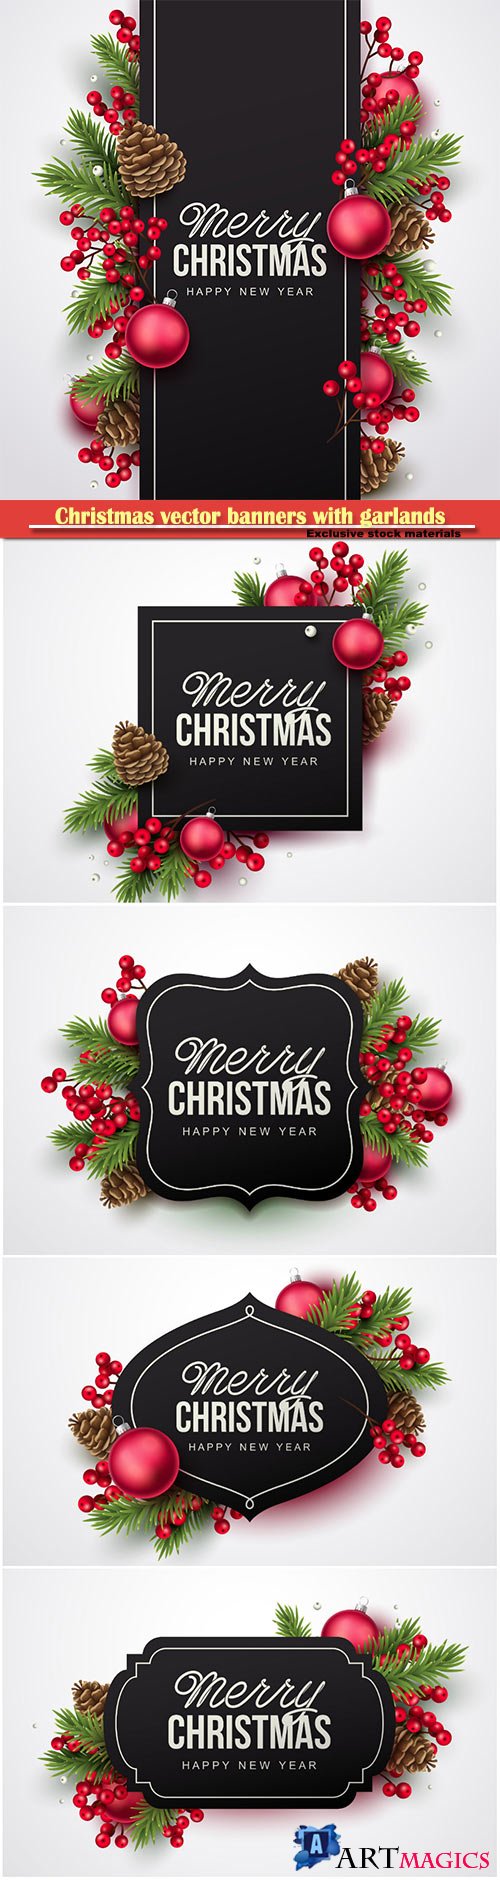 Christmas vector banners with garlands of Christmas trees of cones and balls